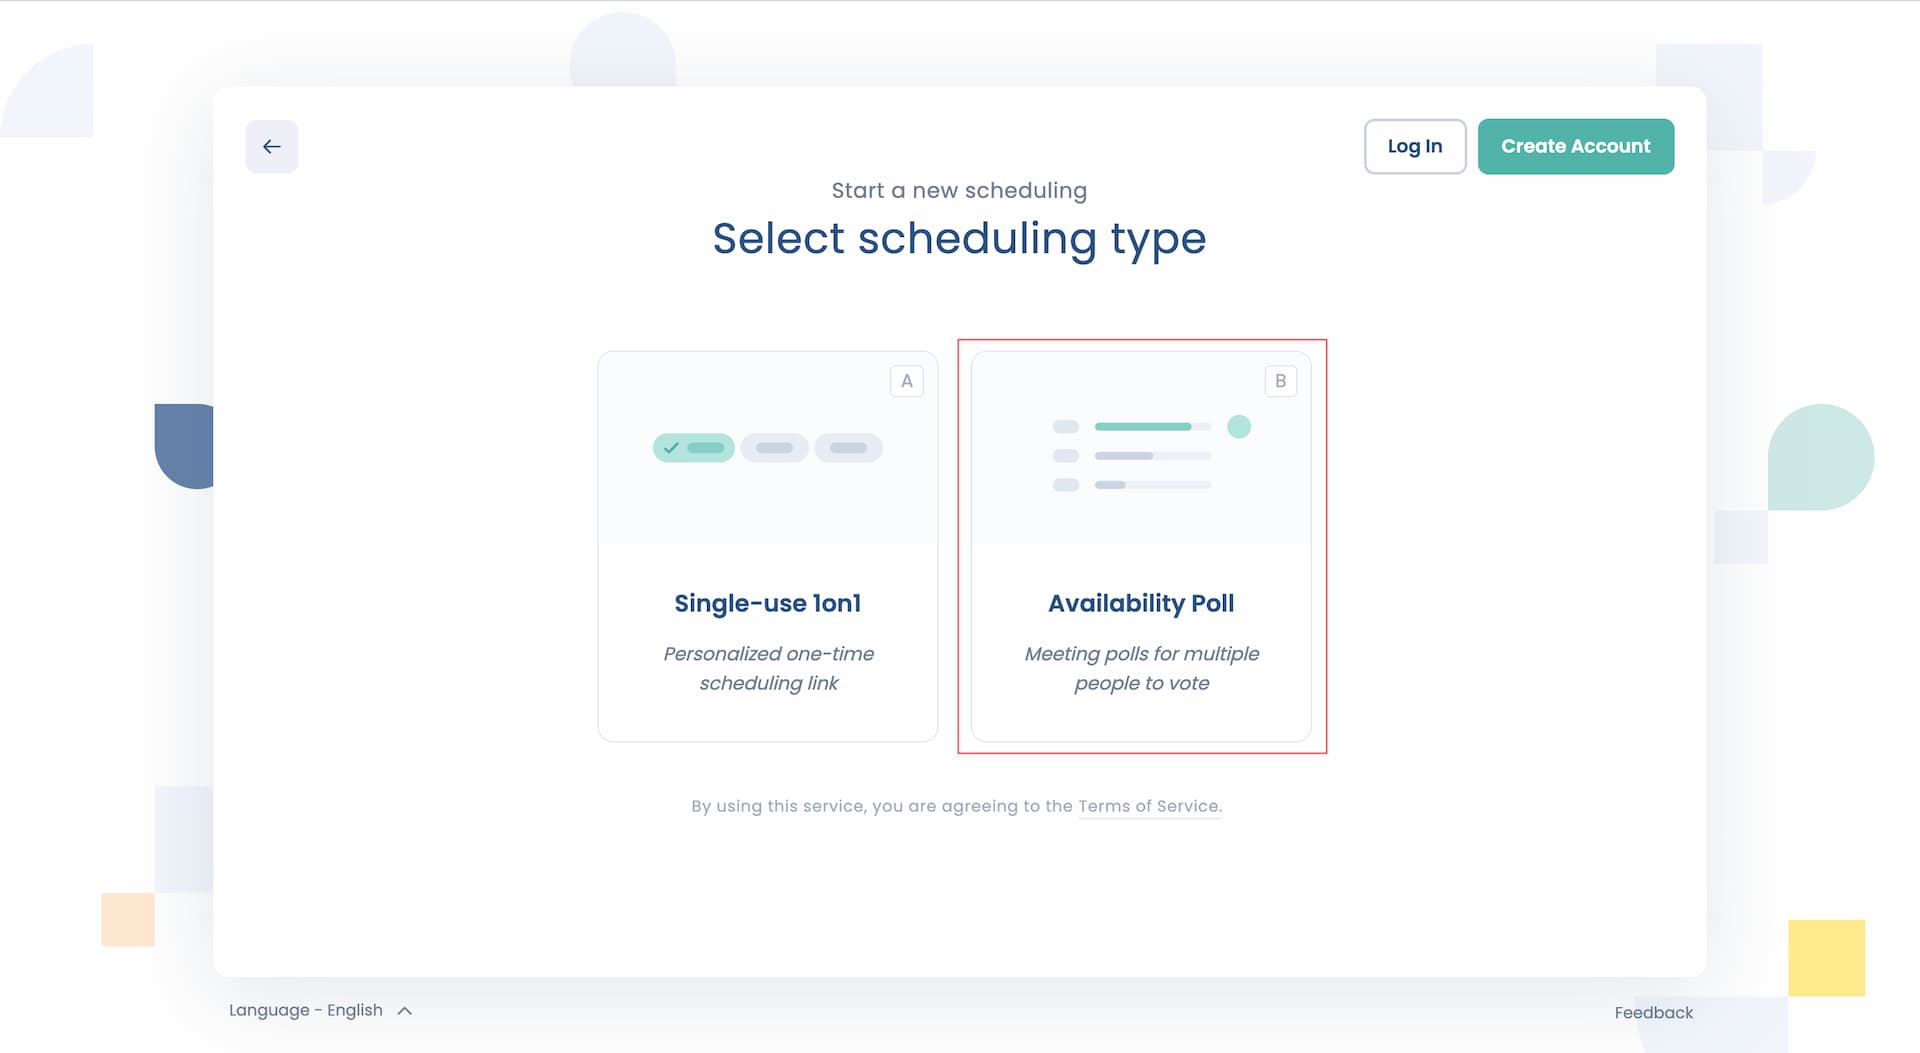 How to use Availability Poll for group scheduling with Attendar (it's free)